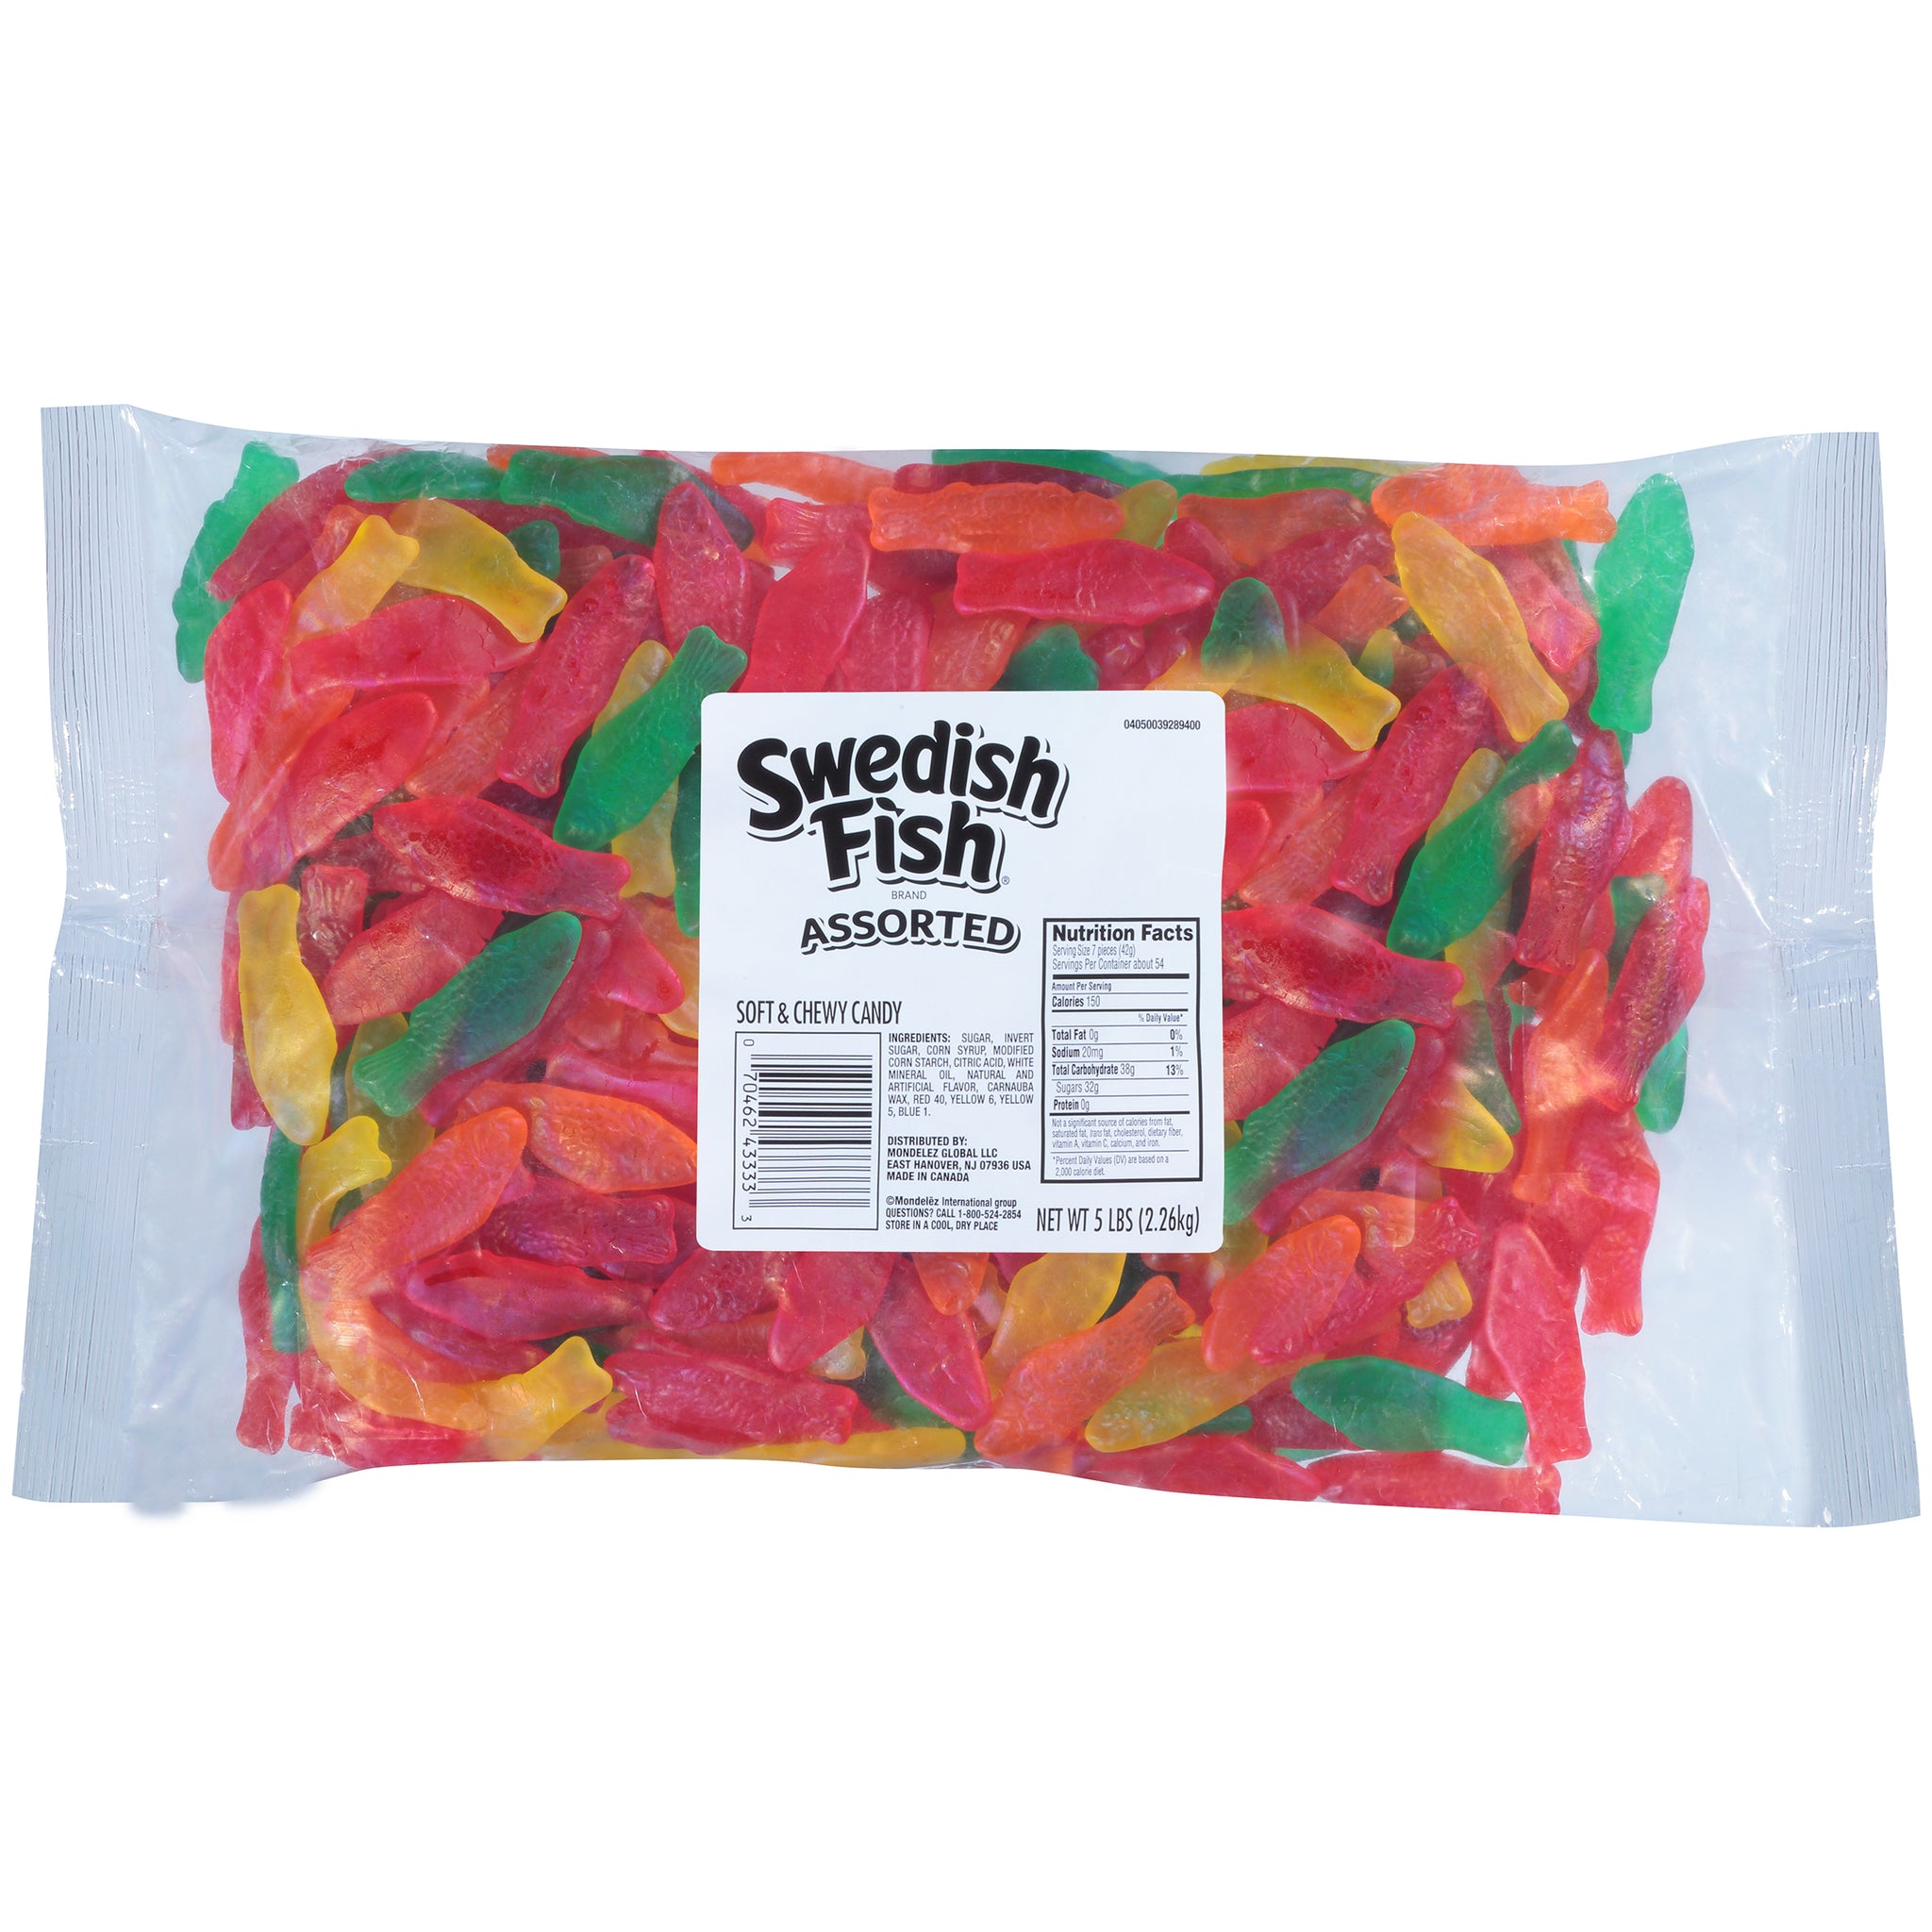 Swedish Fish Assorted Soft & Chewy Candy - 5 LB Bulk Bag - All City Candy